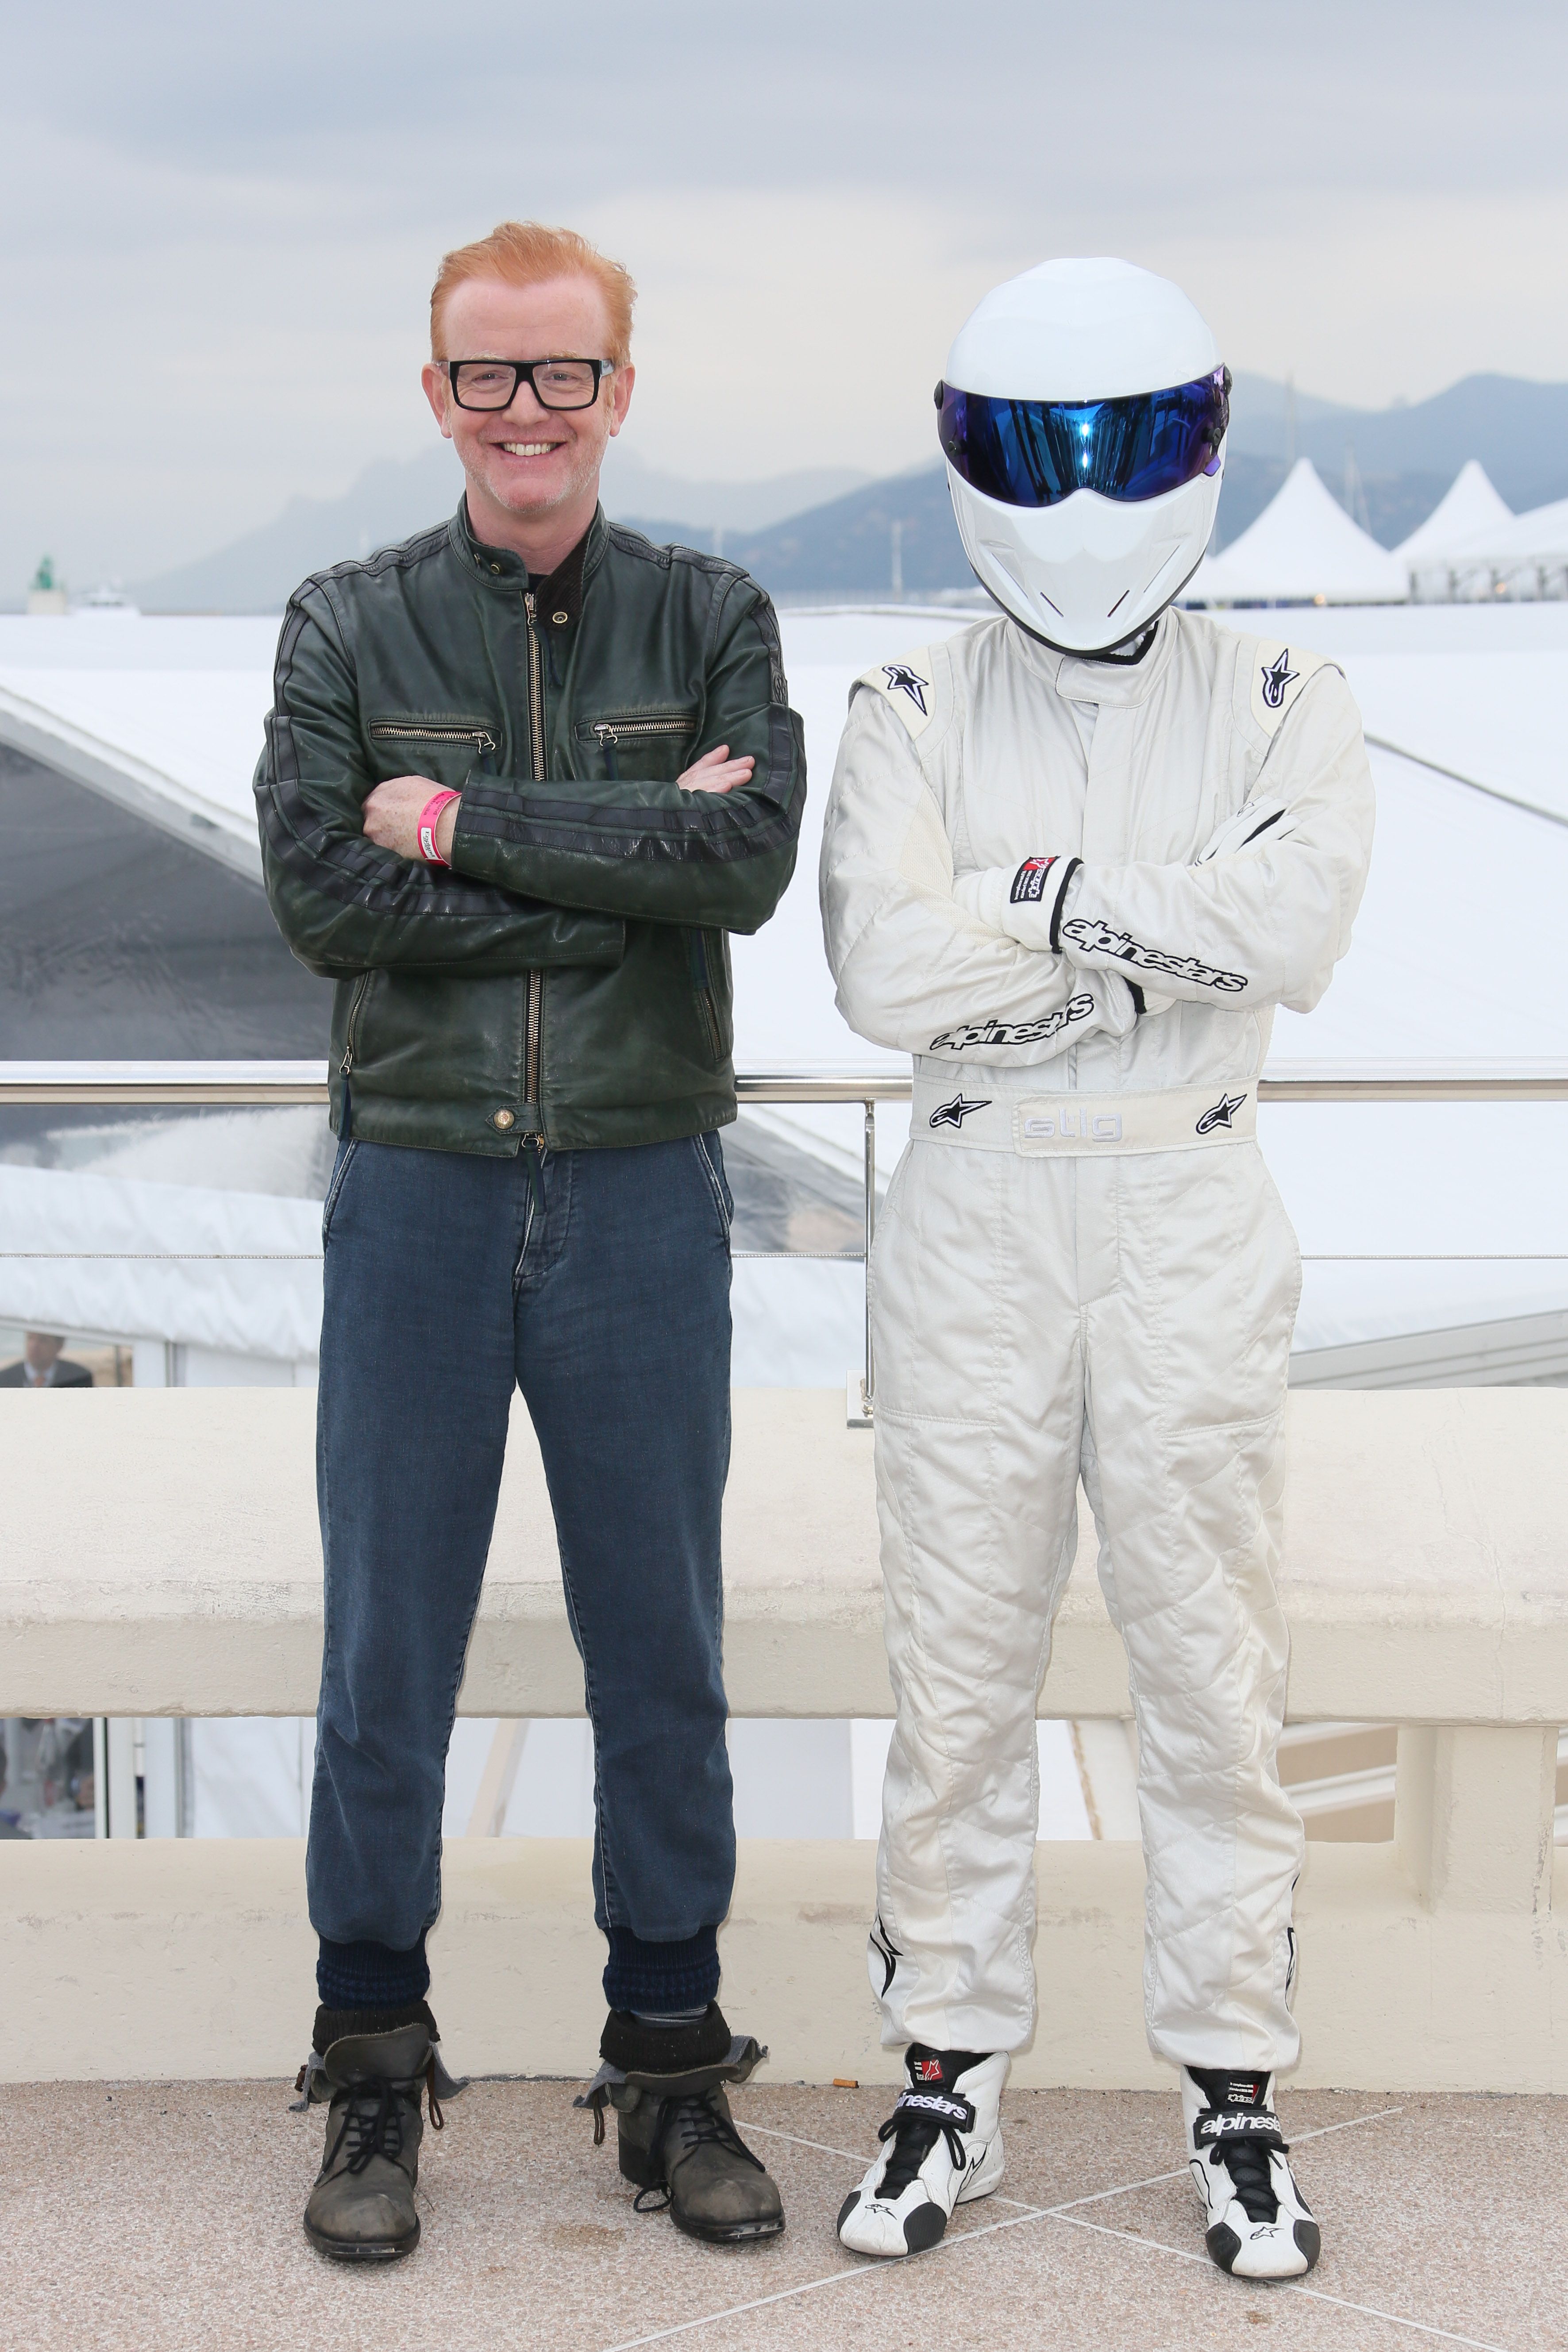 Stig is no longer the fastest Top Gear